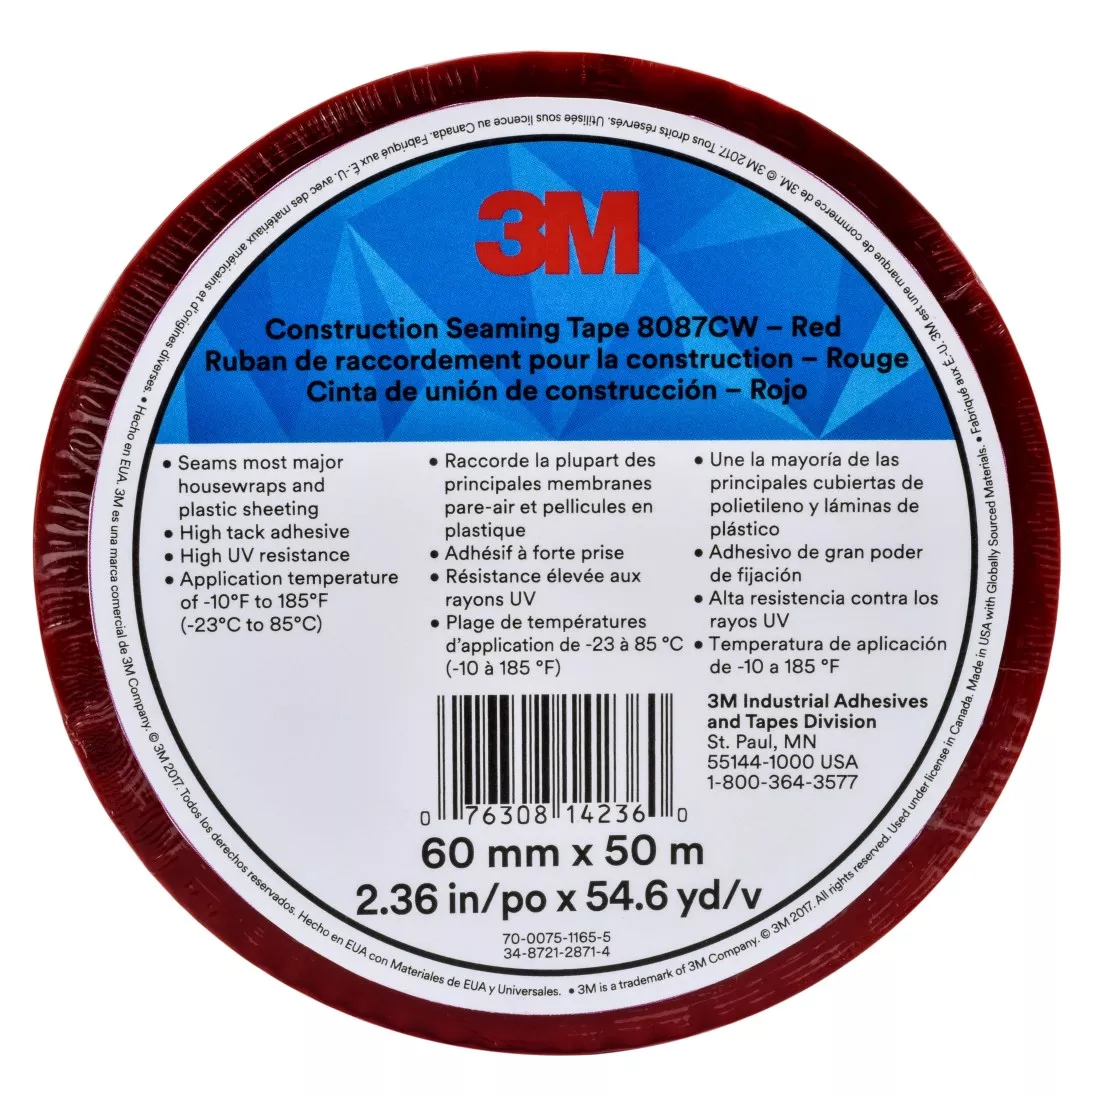 3M™ Construction Seaming Tape 8087CW, Red, 60 mm x 50 m, 20 rolls per
case